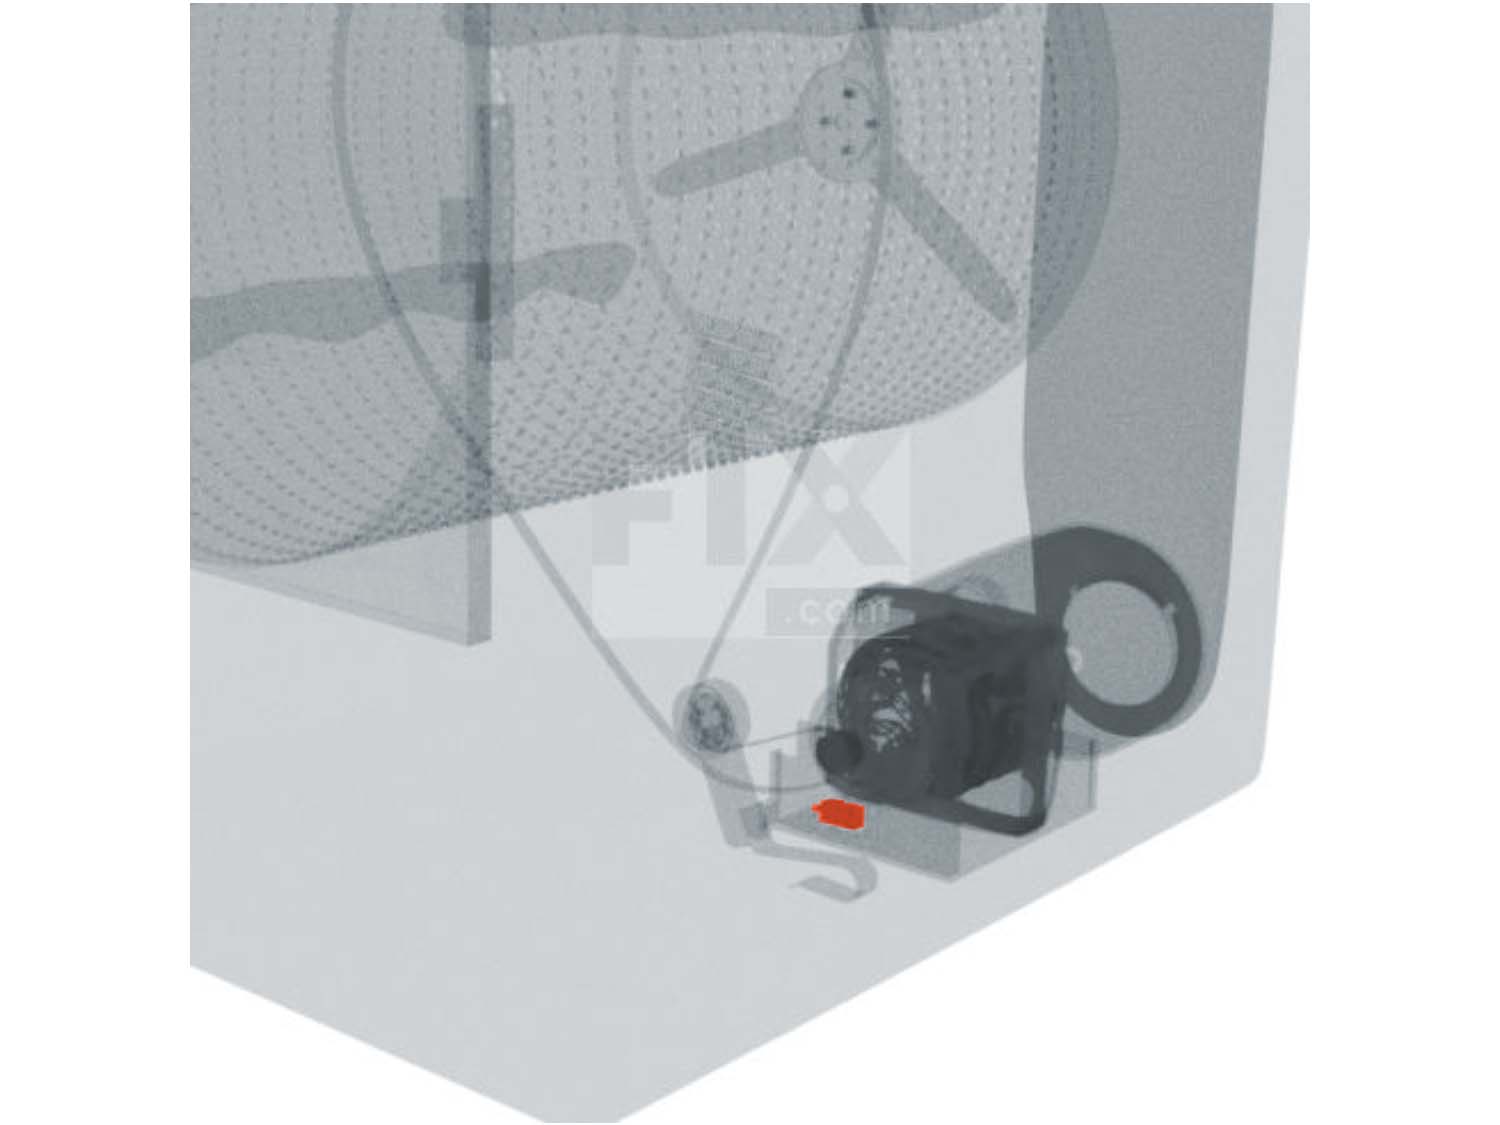 A 3D diagram showing the components of a dryer and specifying the location of the belt break switch